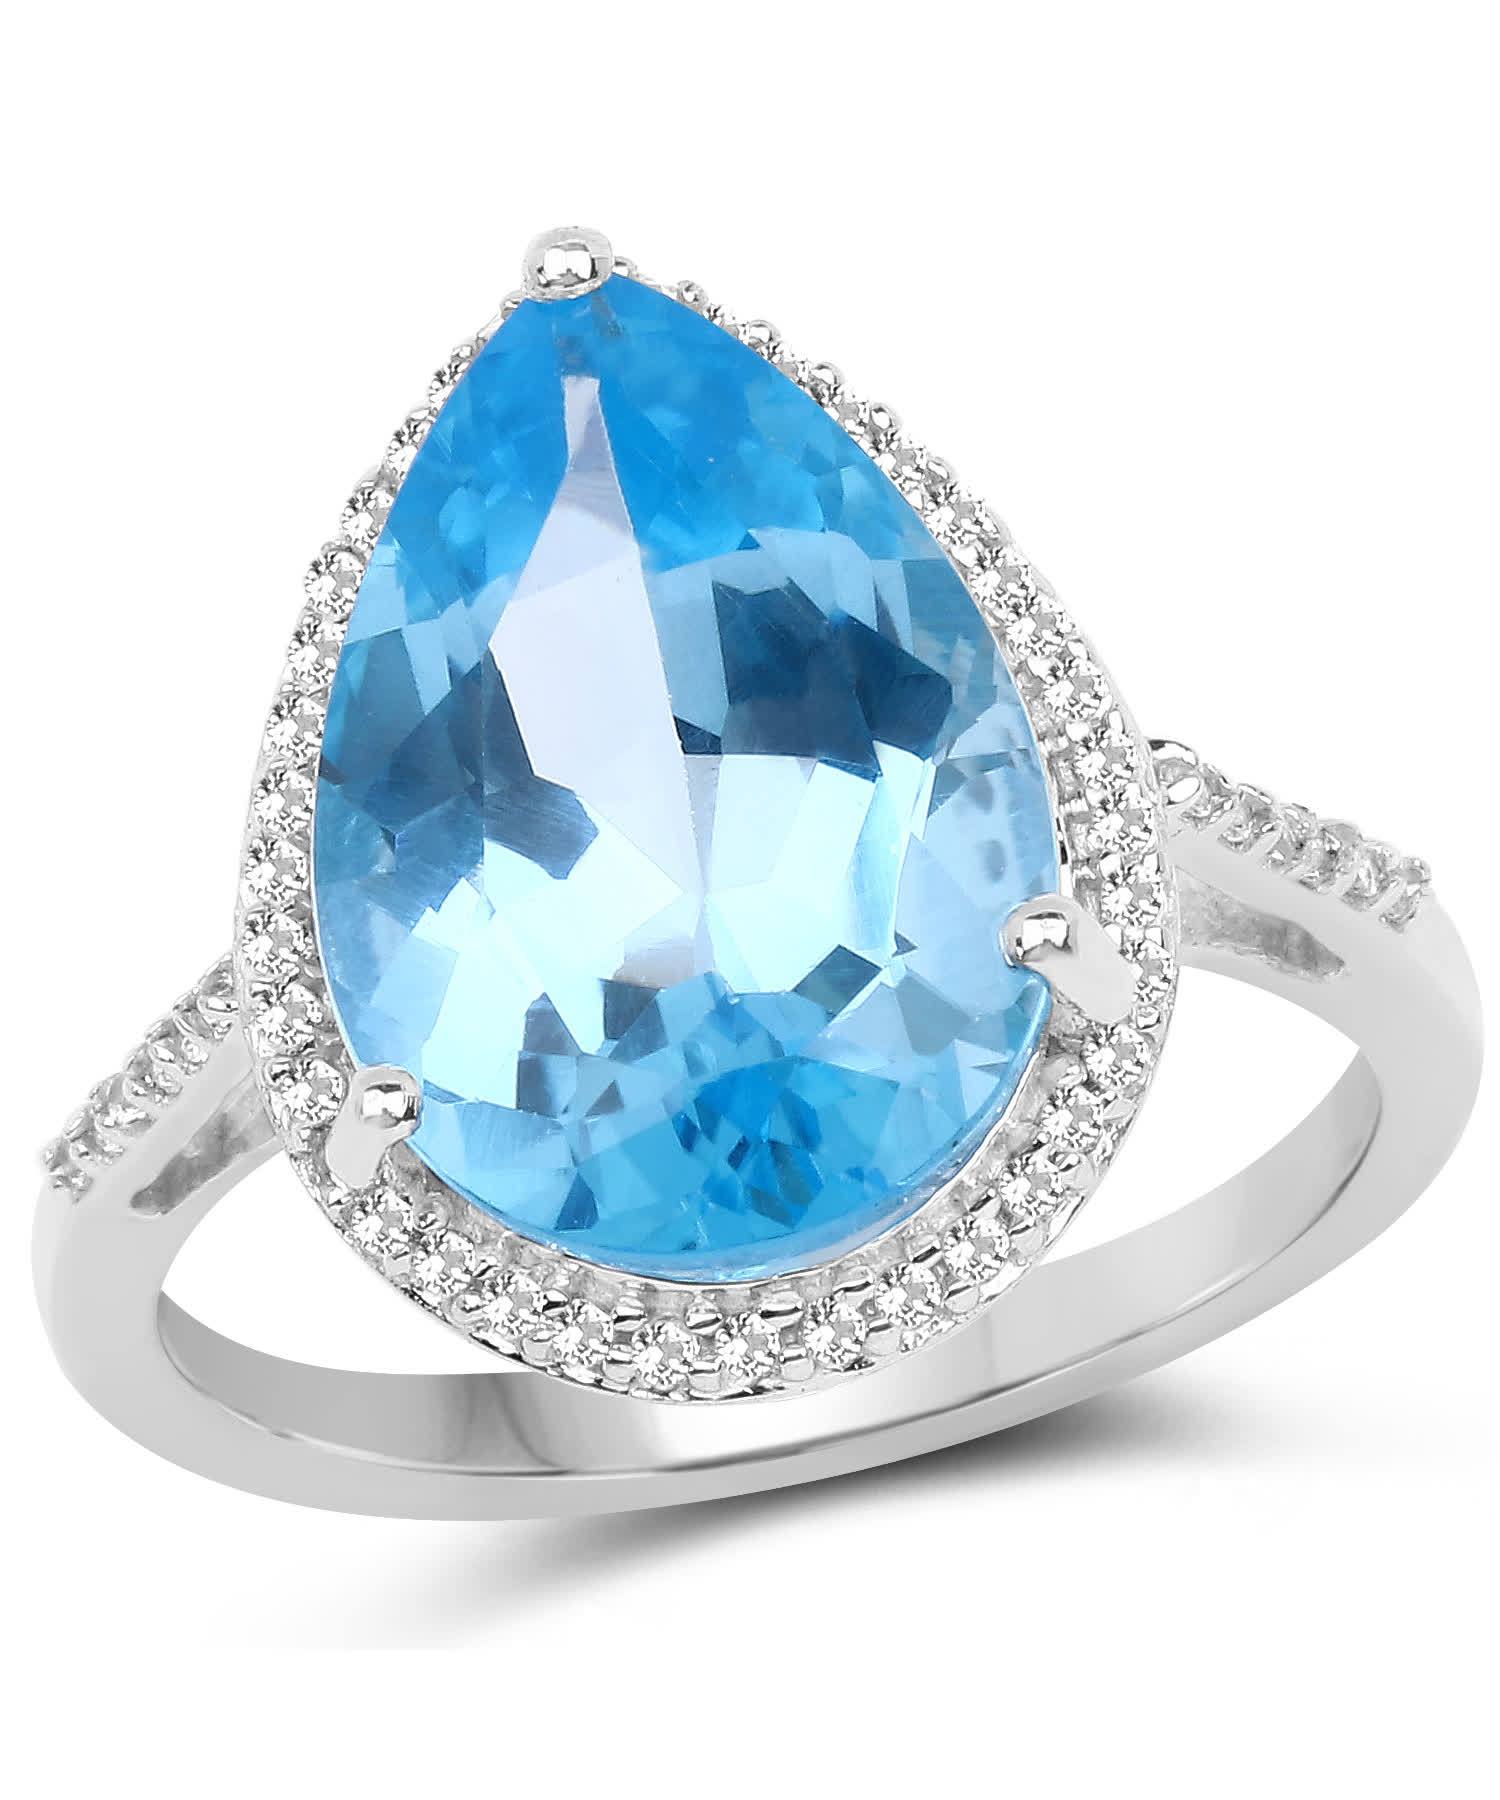 6.77ctw Natural Swiss Blue Topaz Rhodium Plated 925 Sterling Silver Halo Cocktail Ring View 1